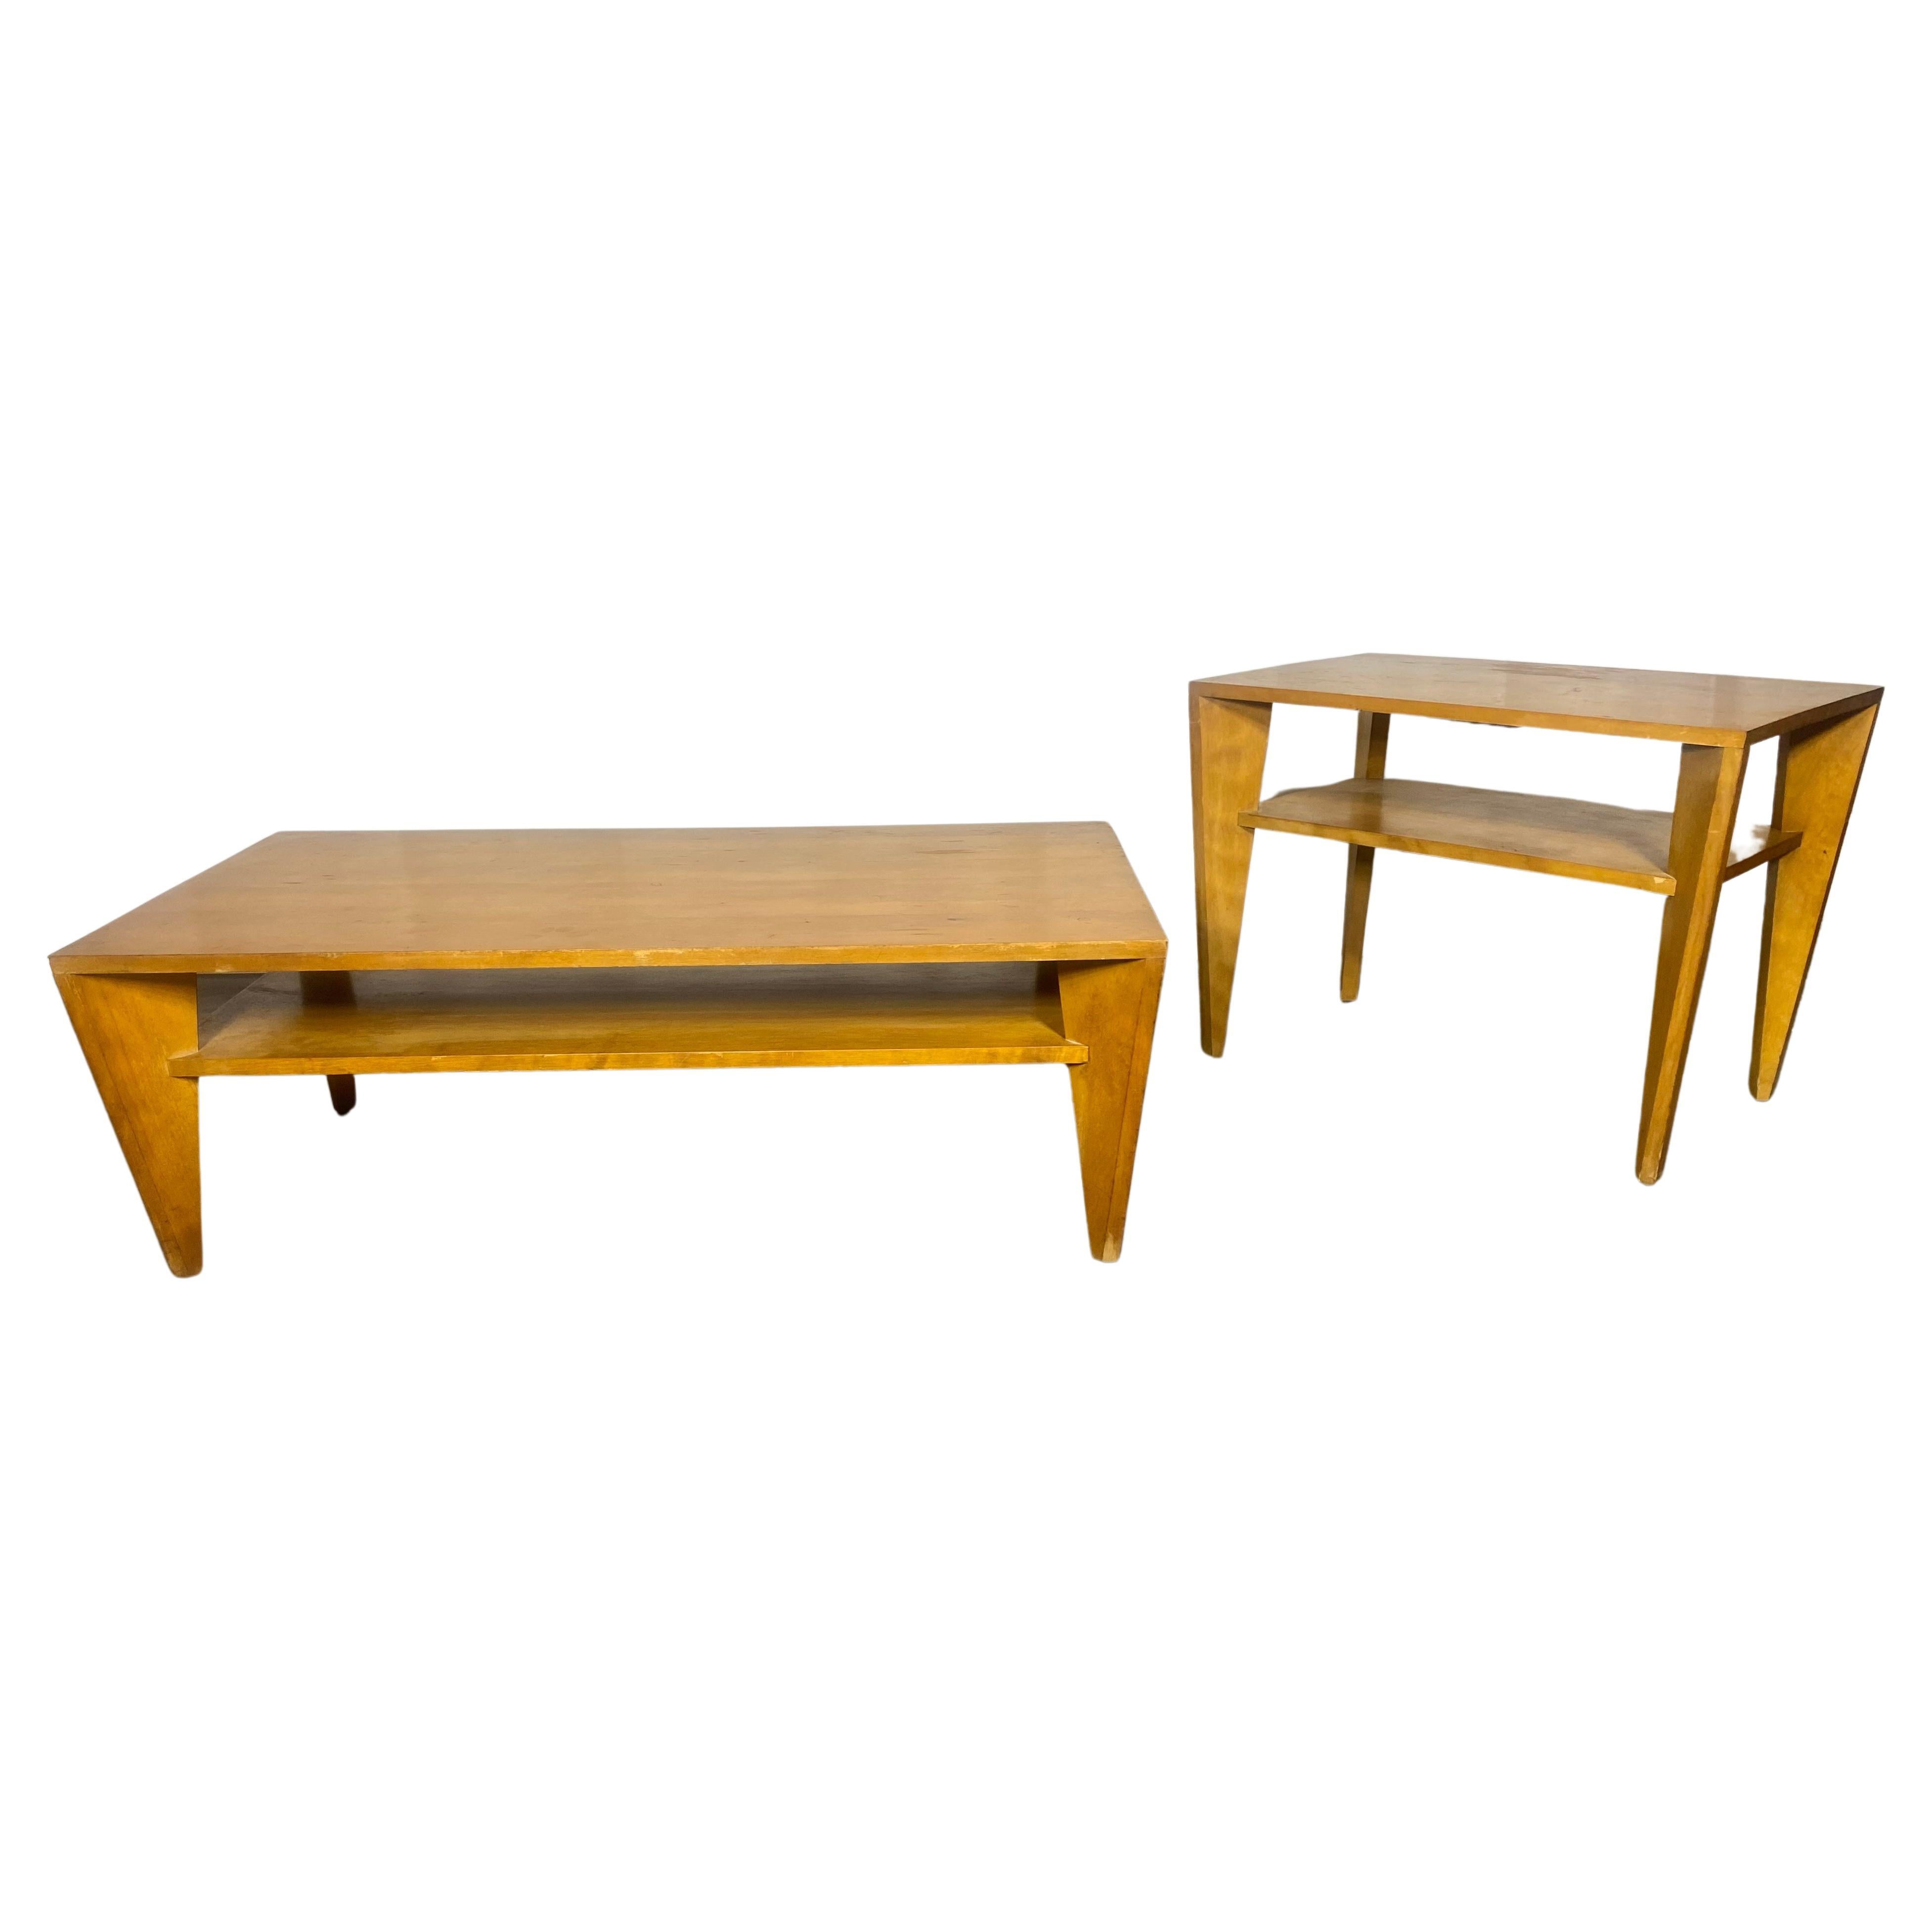 Russel Wright for Conant Ball Solid Maple Coffee and Side Table, Classic Modern Design,, End / side table measures 28